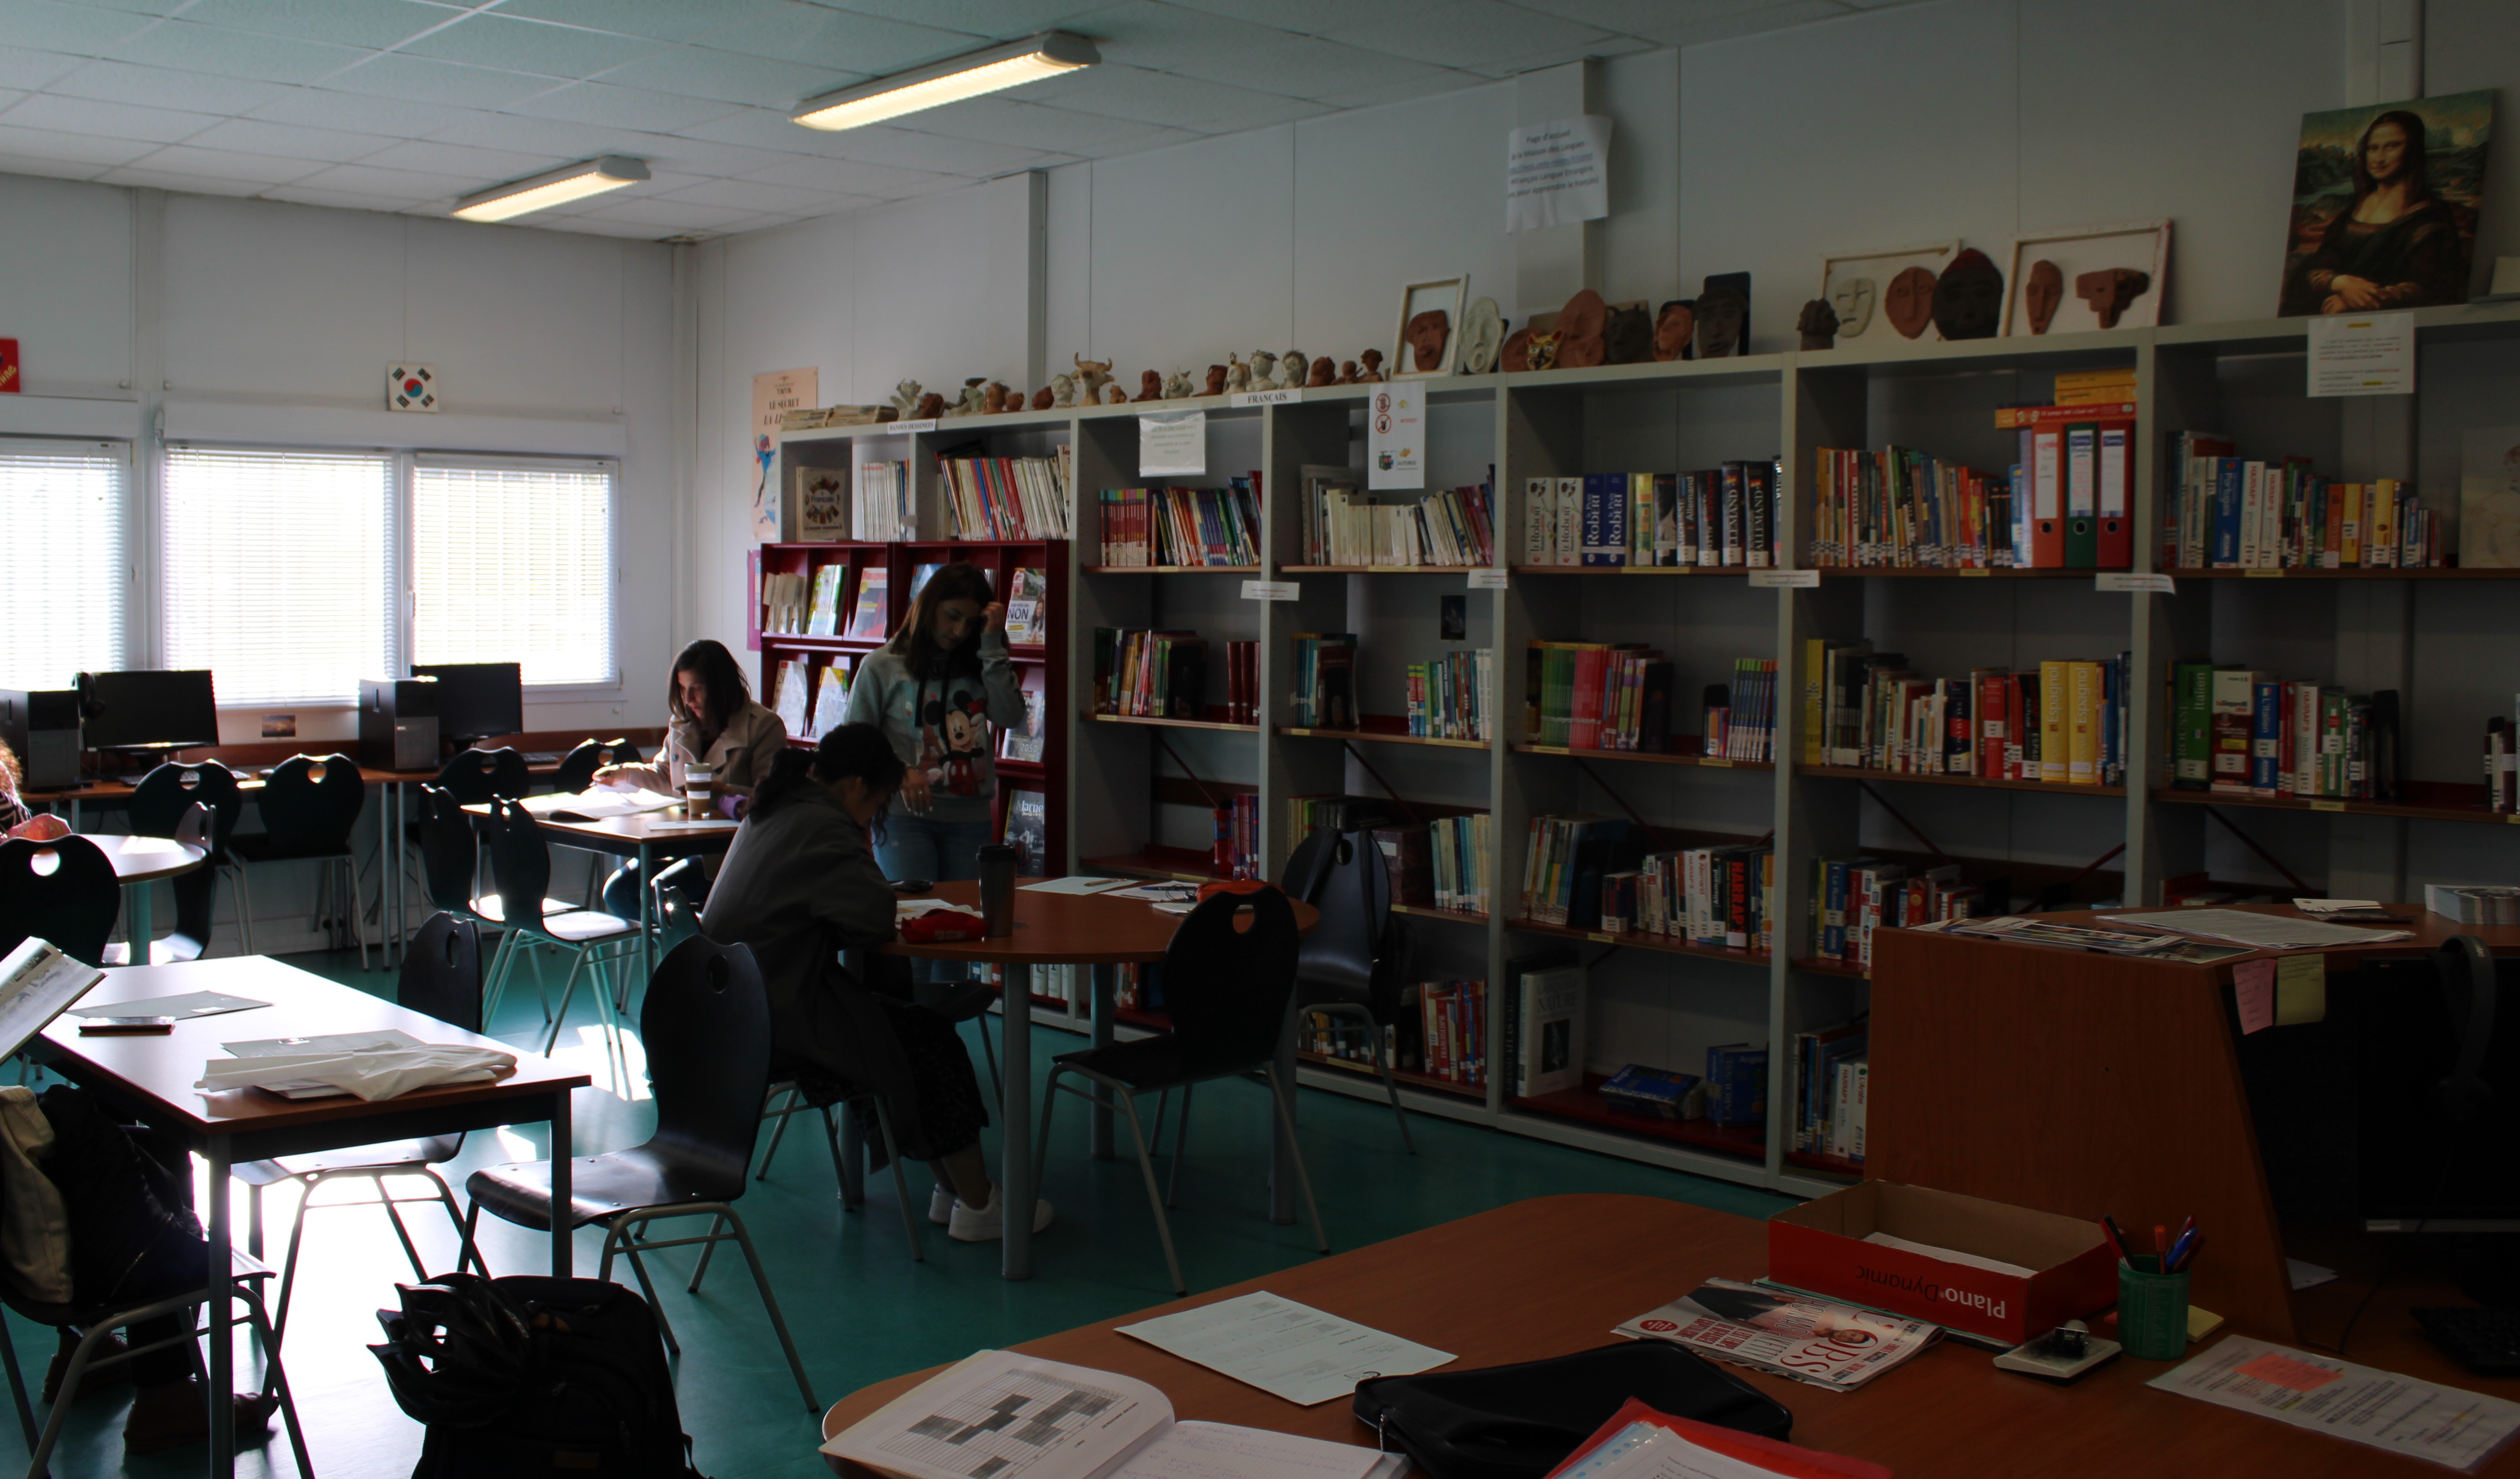 The Language resource centre and students